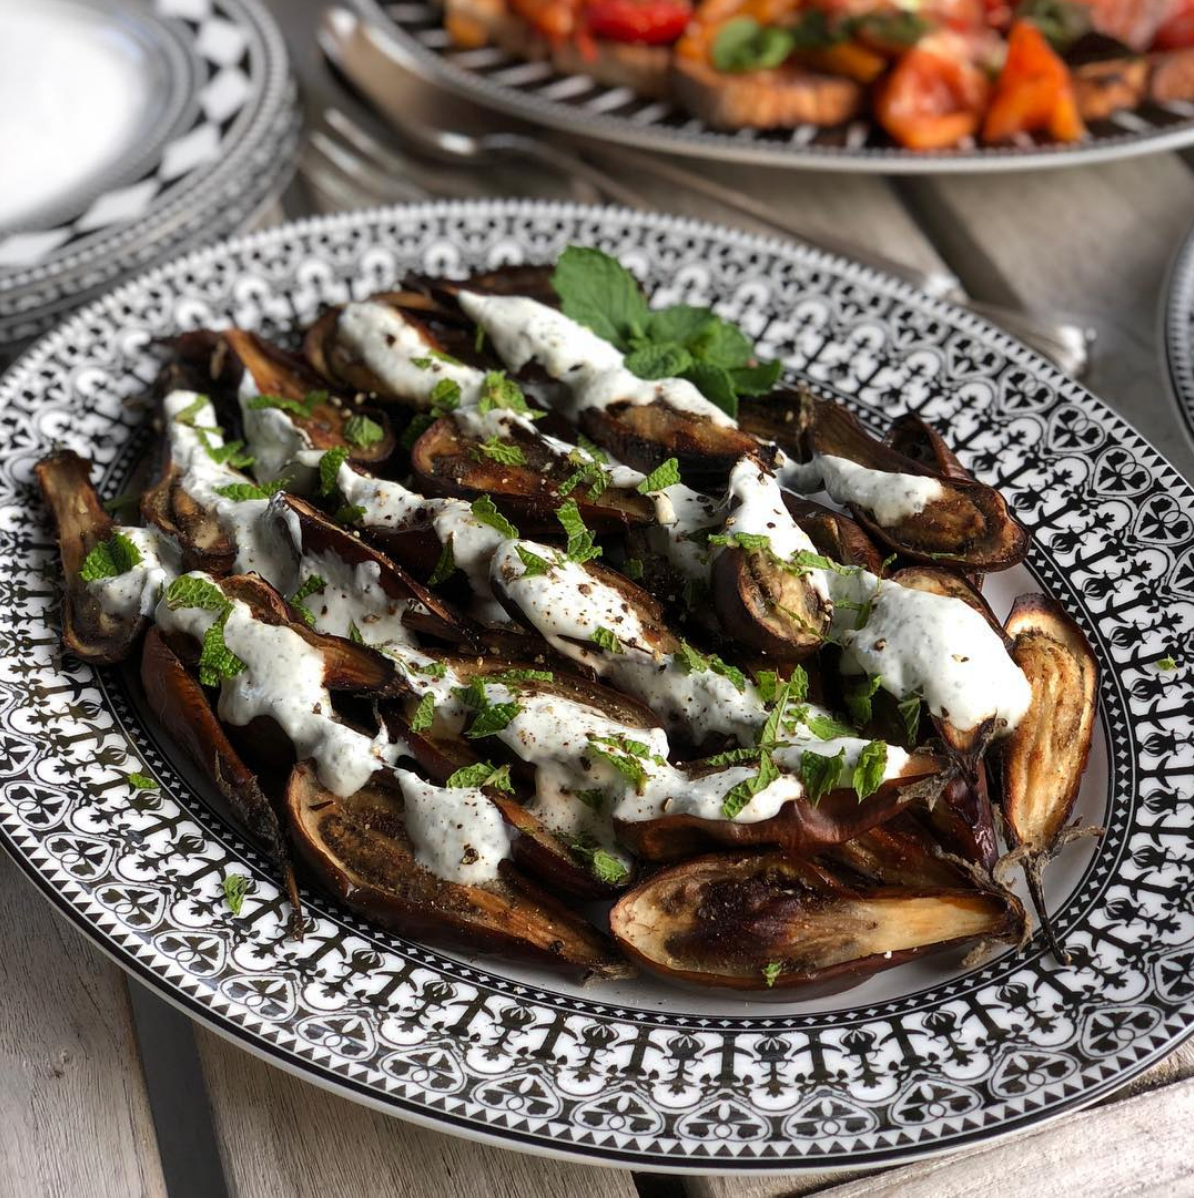 Roasted aubergine with tzatziki sauce, the Casablanca Black Large Oval Rimmed Platter by Caskata Artisanal Home, a high-quality dish that ensures a secure fit and evenly distributes weight to reduce strain on your back.